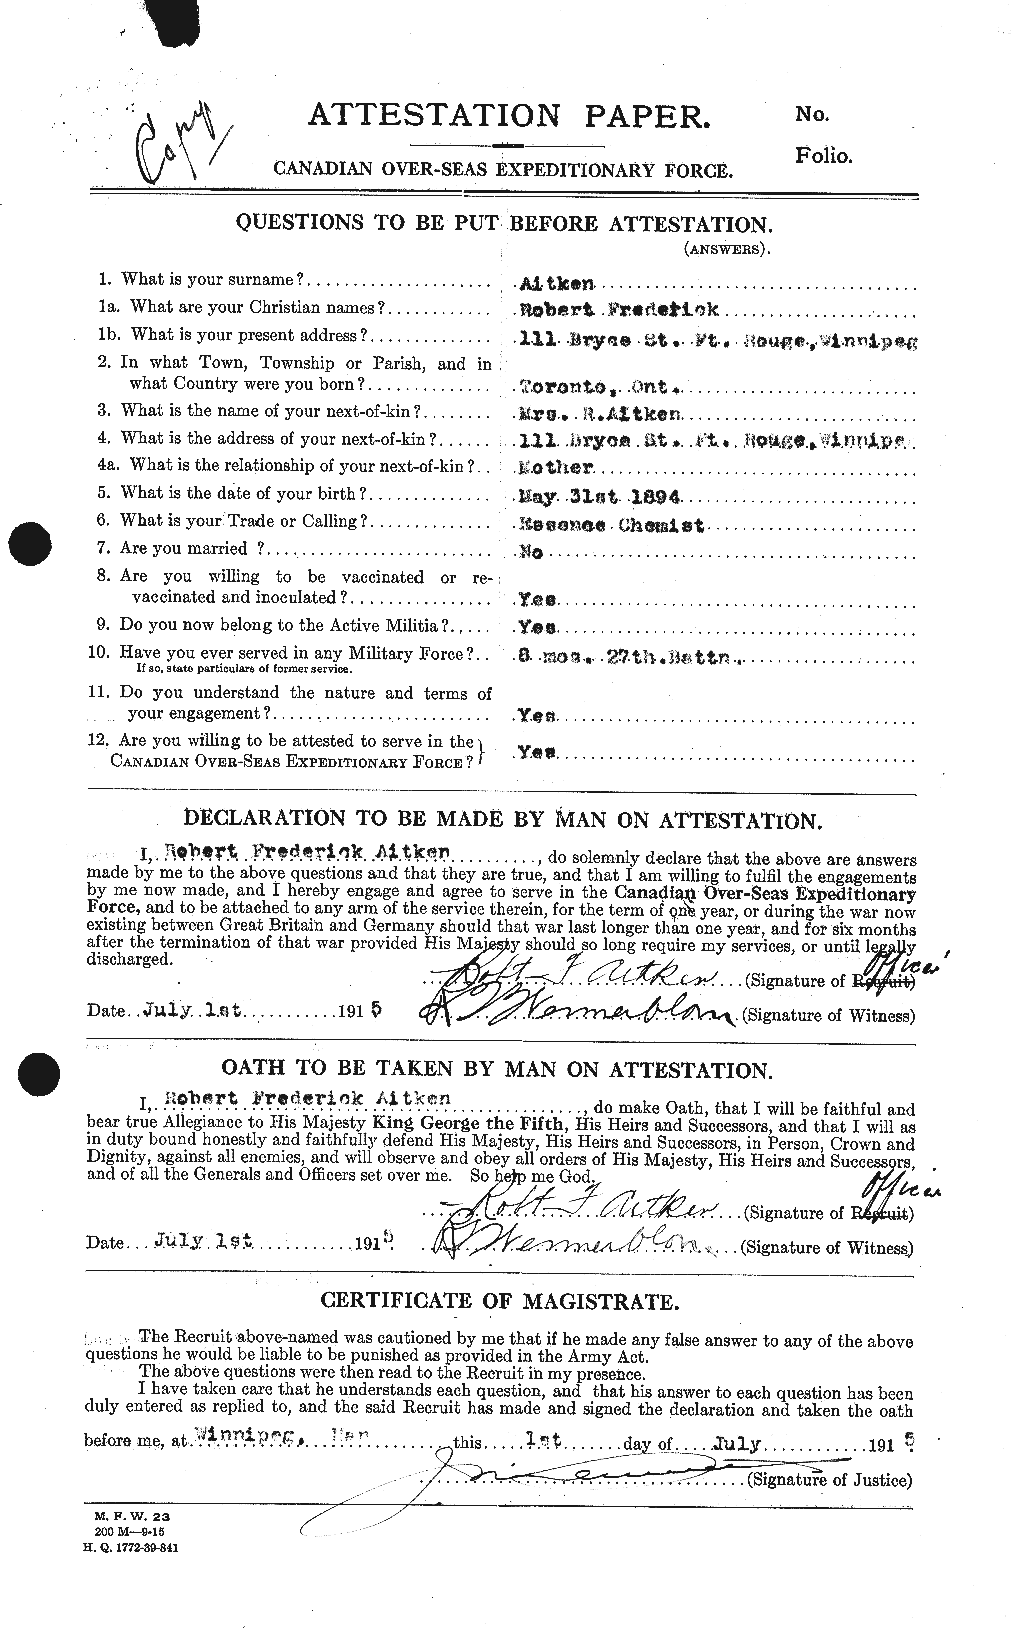 Personnel Records of the First World War - CEF 203432a